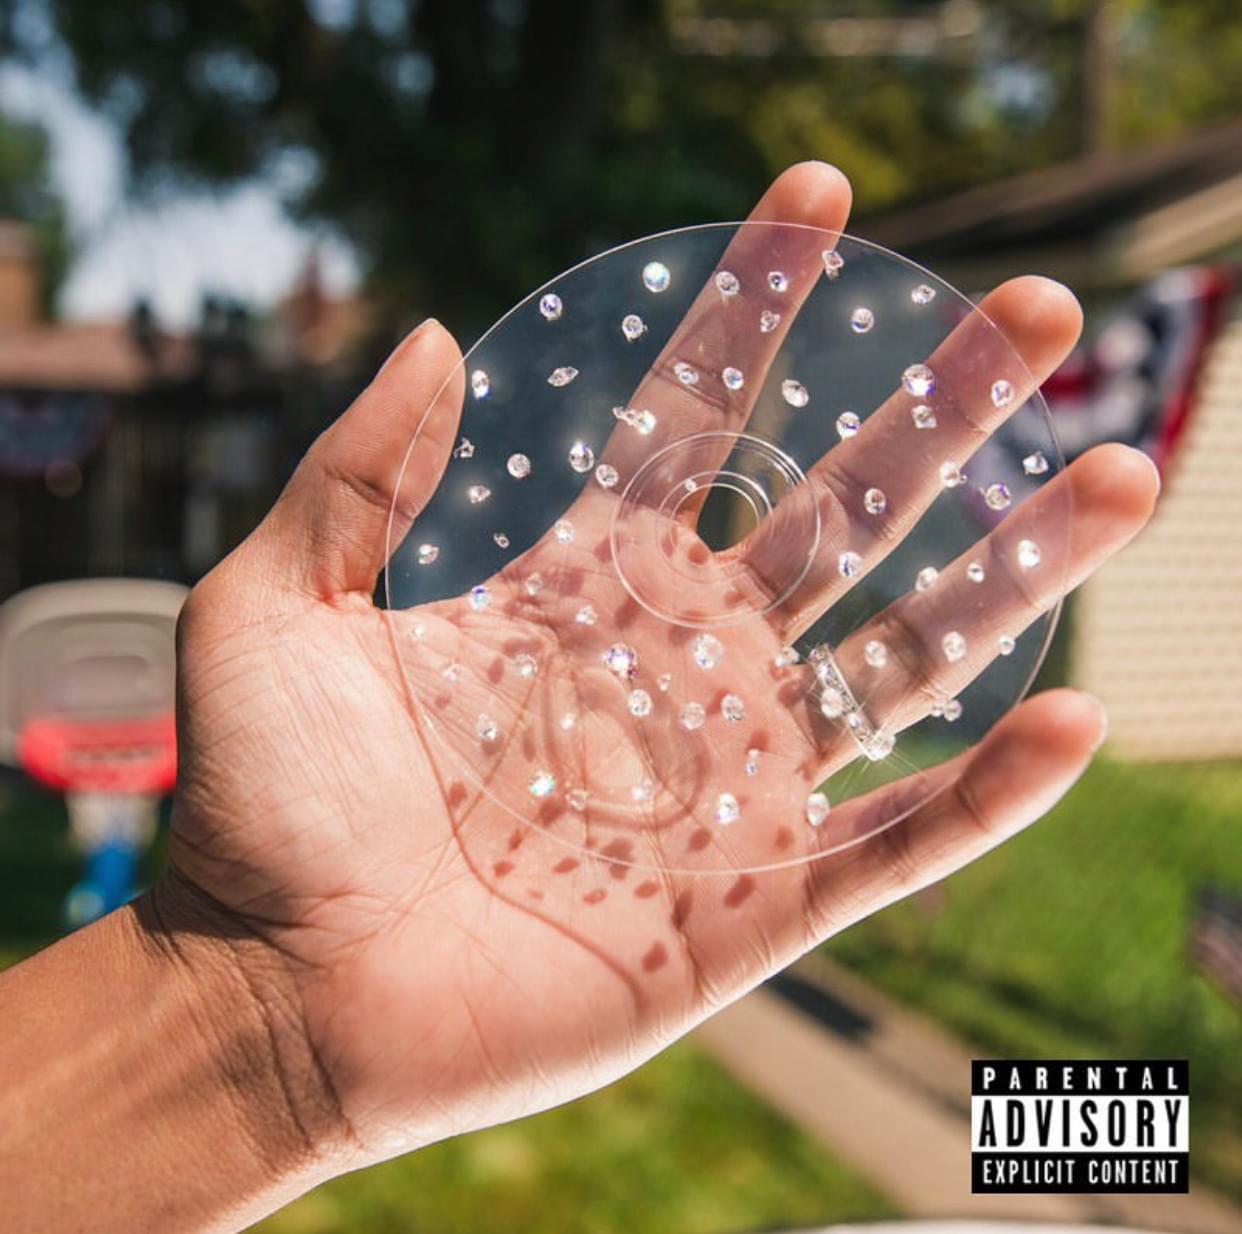 [LISTEN] Chance the Rapper’s Album ‘The Big Day’ Is FINALLY Out